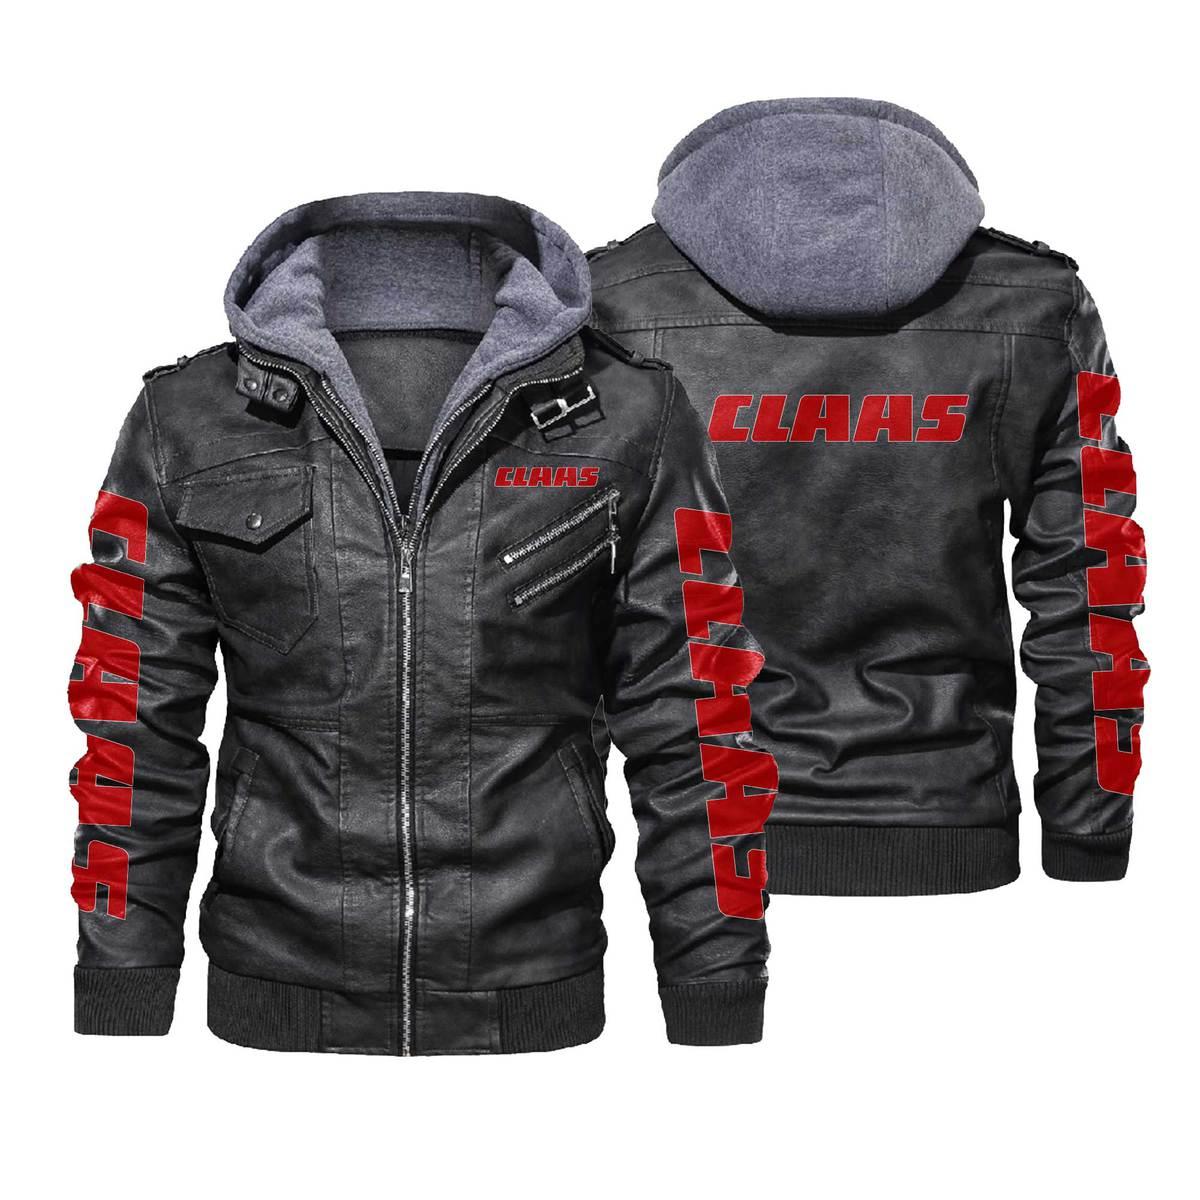 Claas Leather Jacket LJ0906 – Let the colors inspire you!